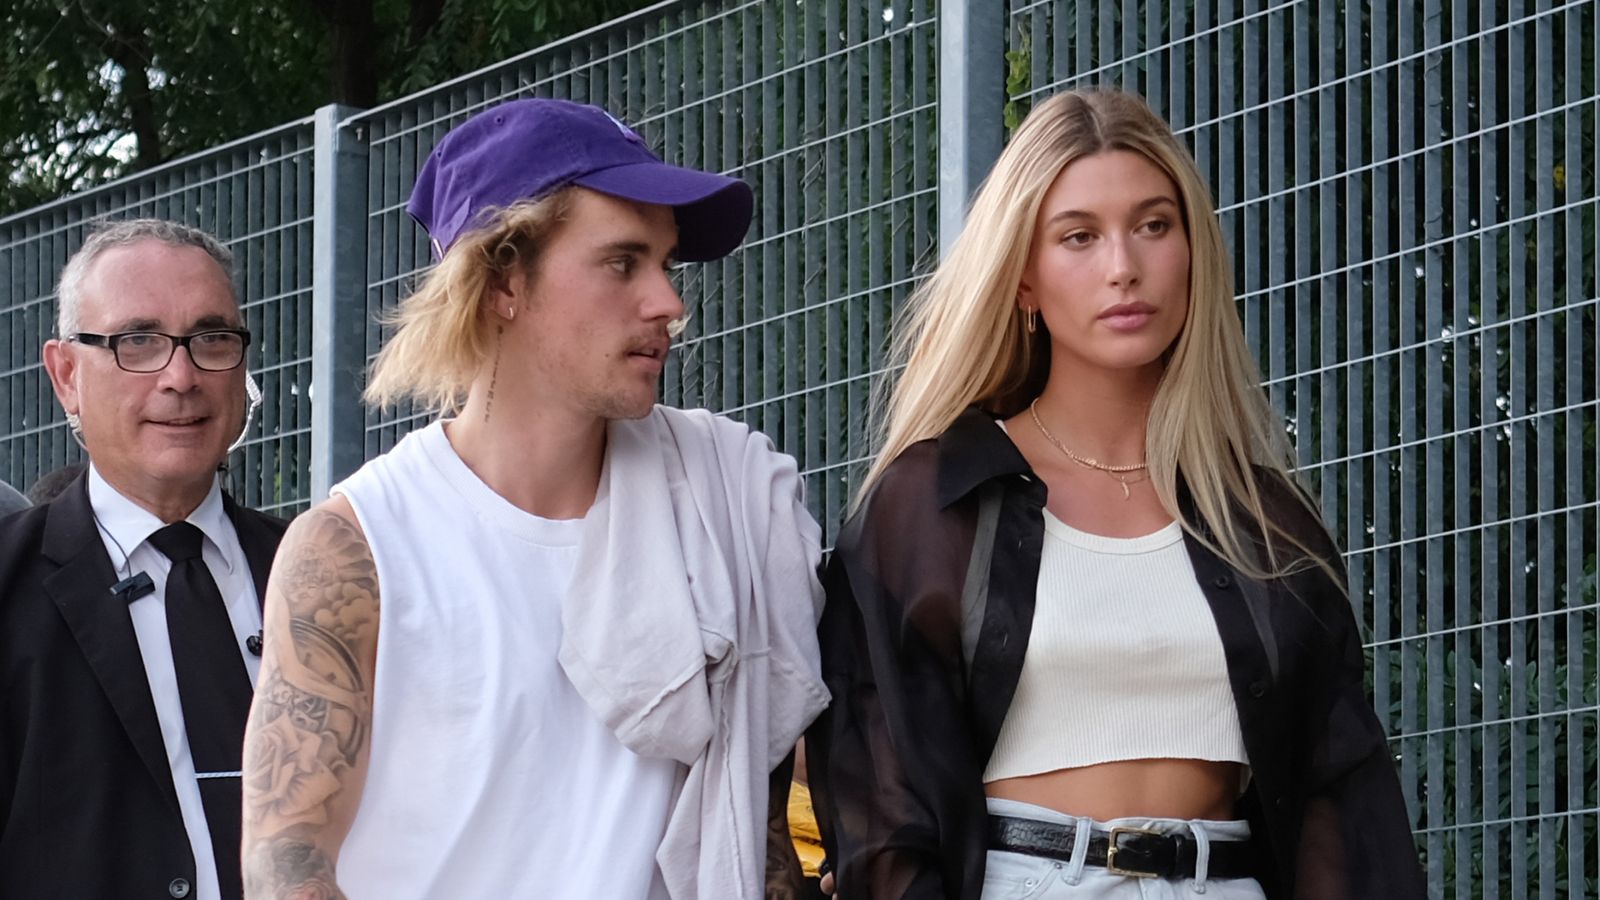 Justin Bieber Honours Wife Hailey With Romantic Poem On Instagram